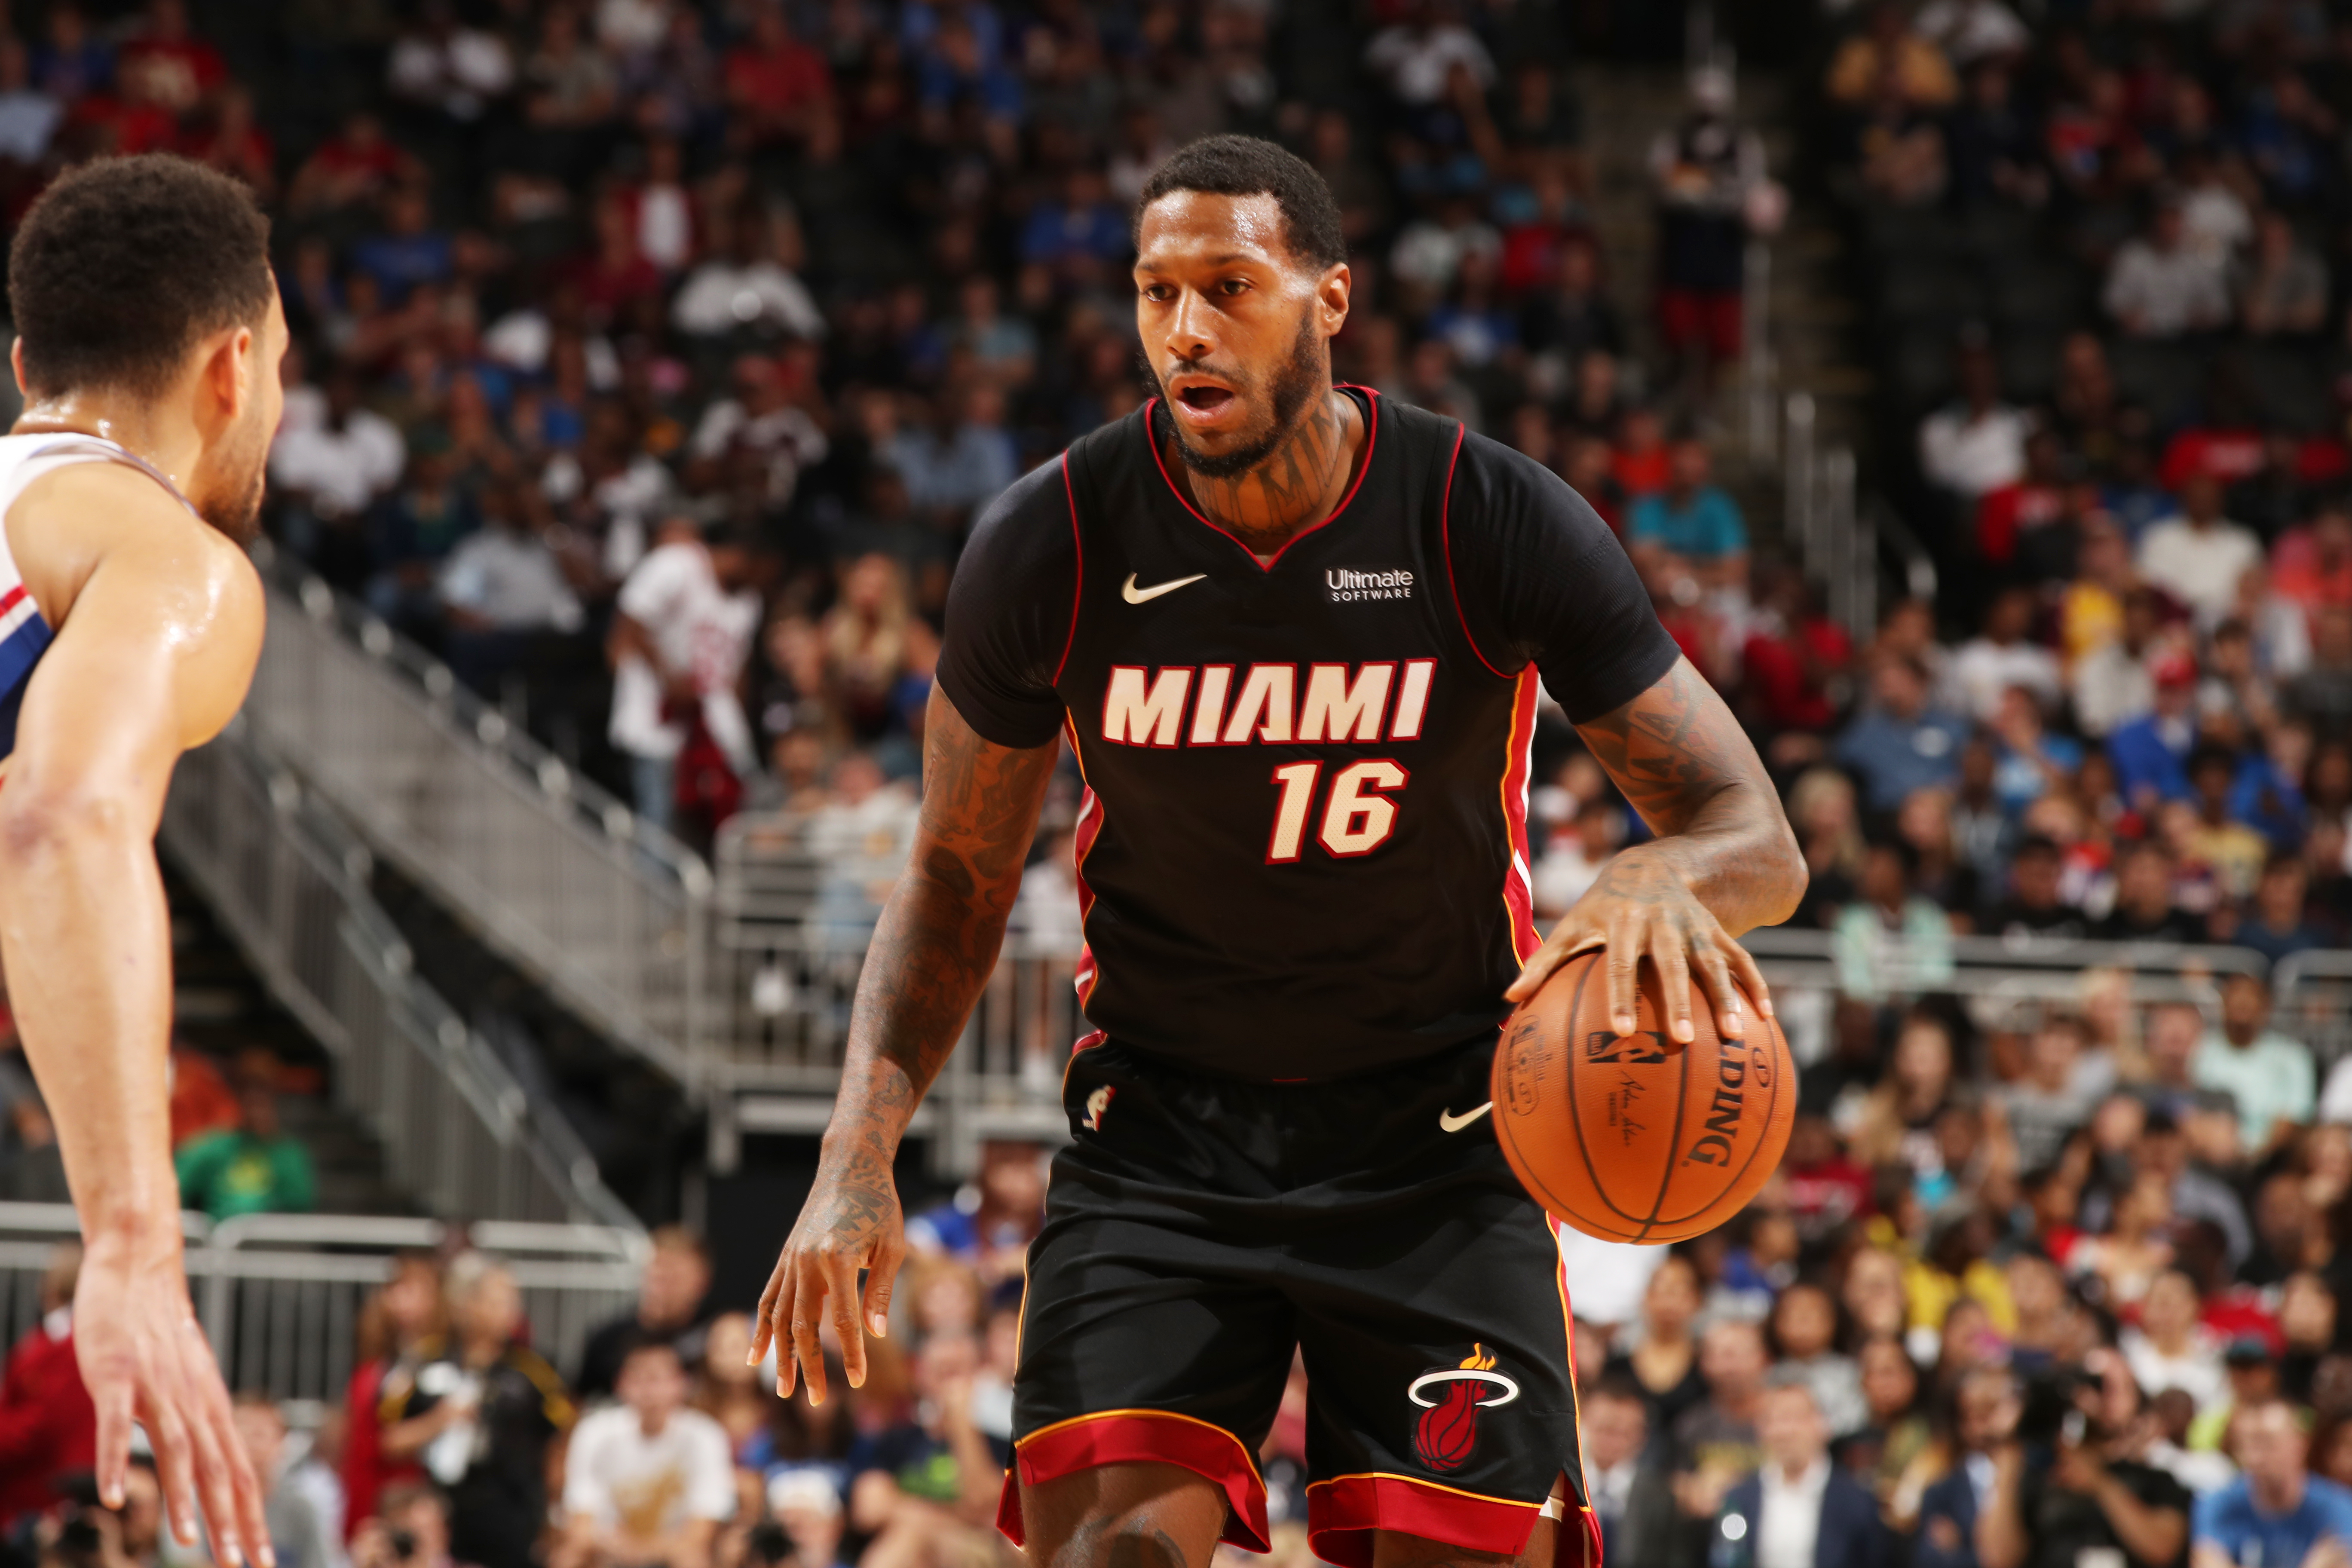 The 5 Best Power Forwards to Target in Daily Fantasy Basketball Tournaments  - 1. James Johnson, Miami Heat